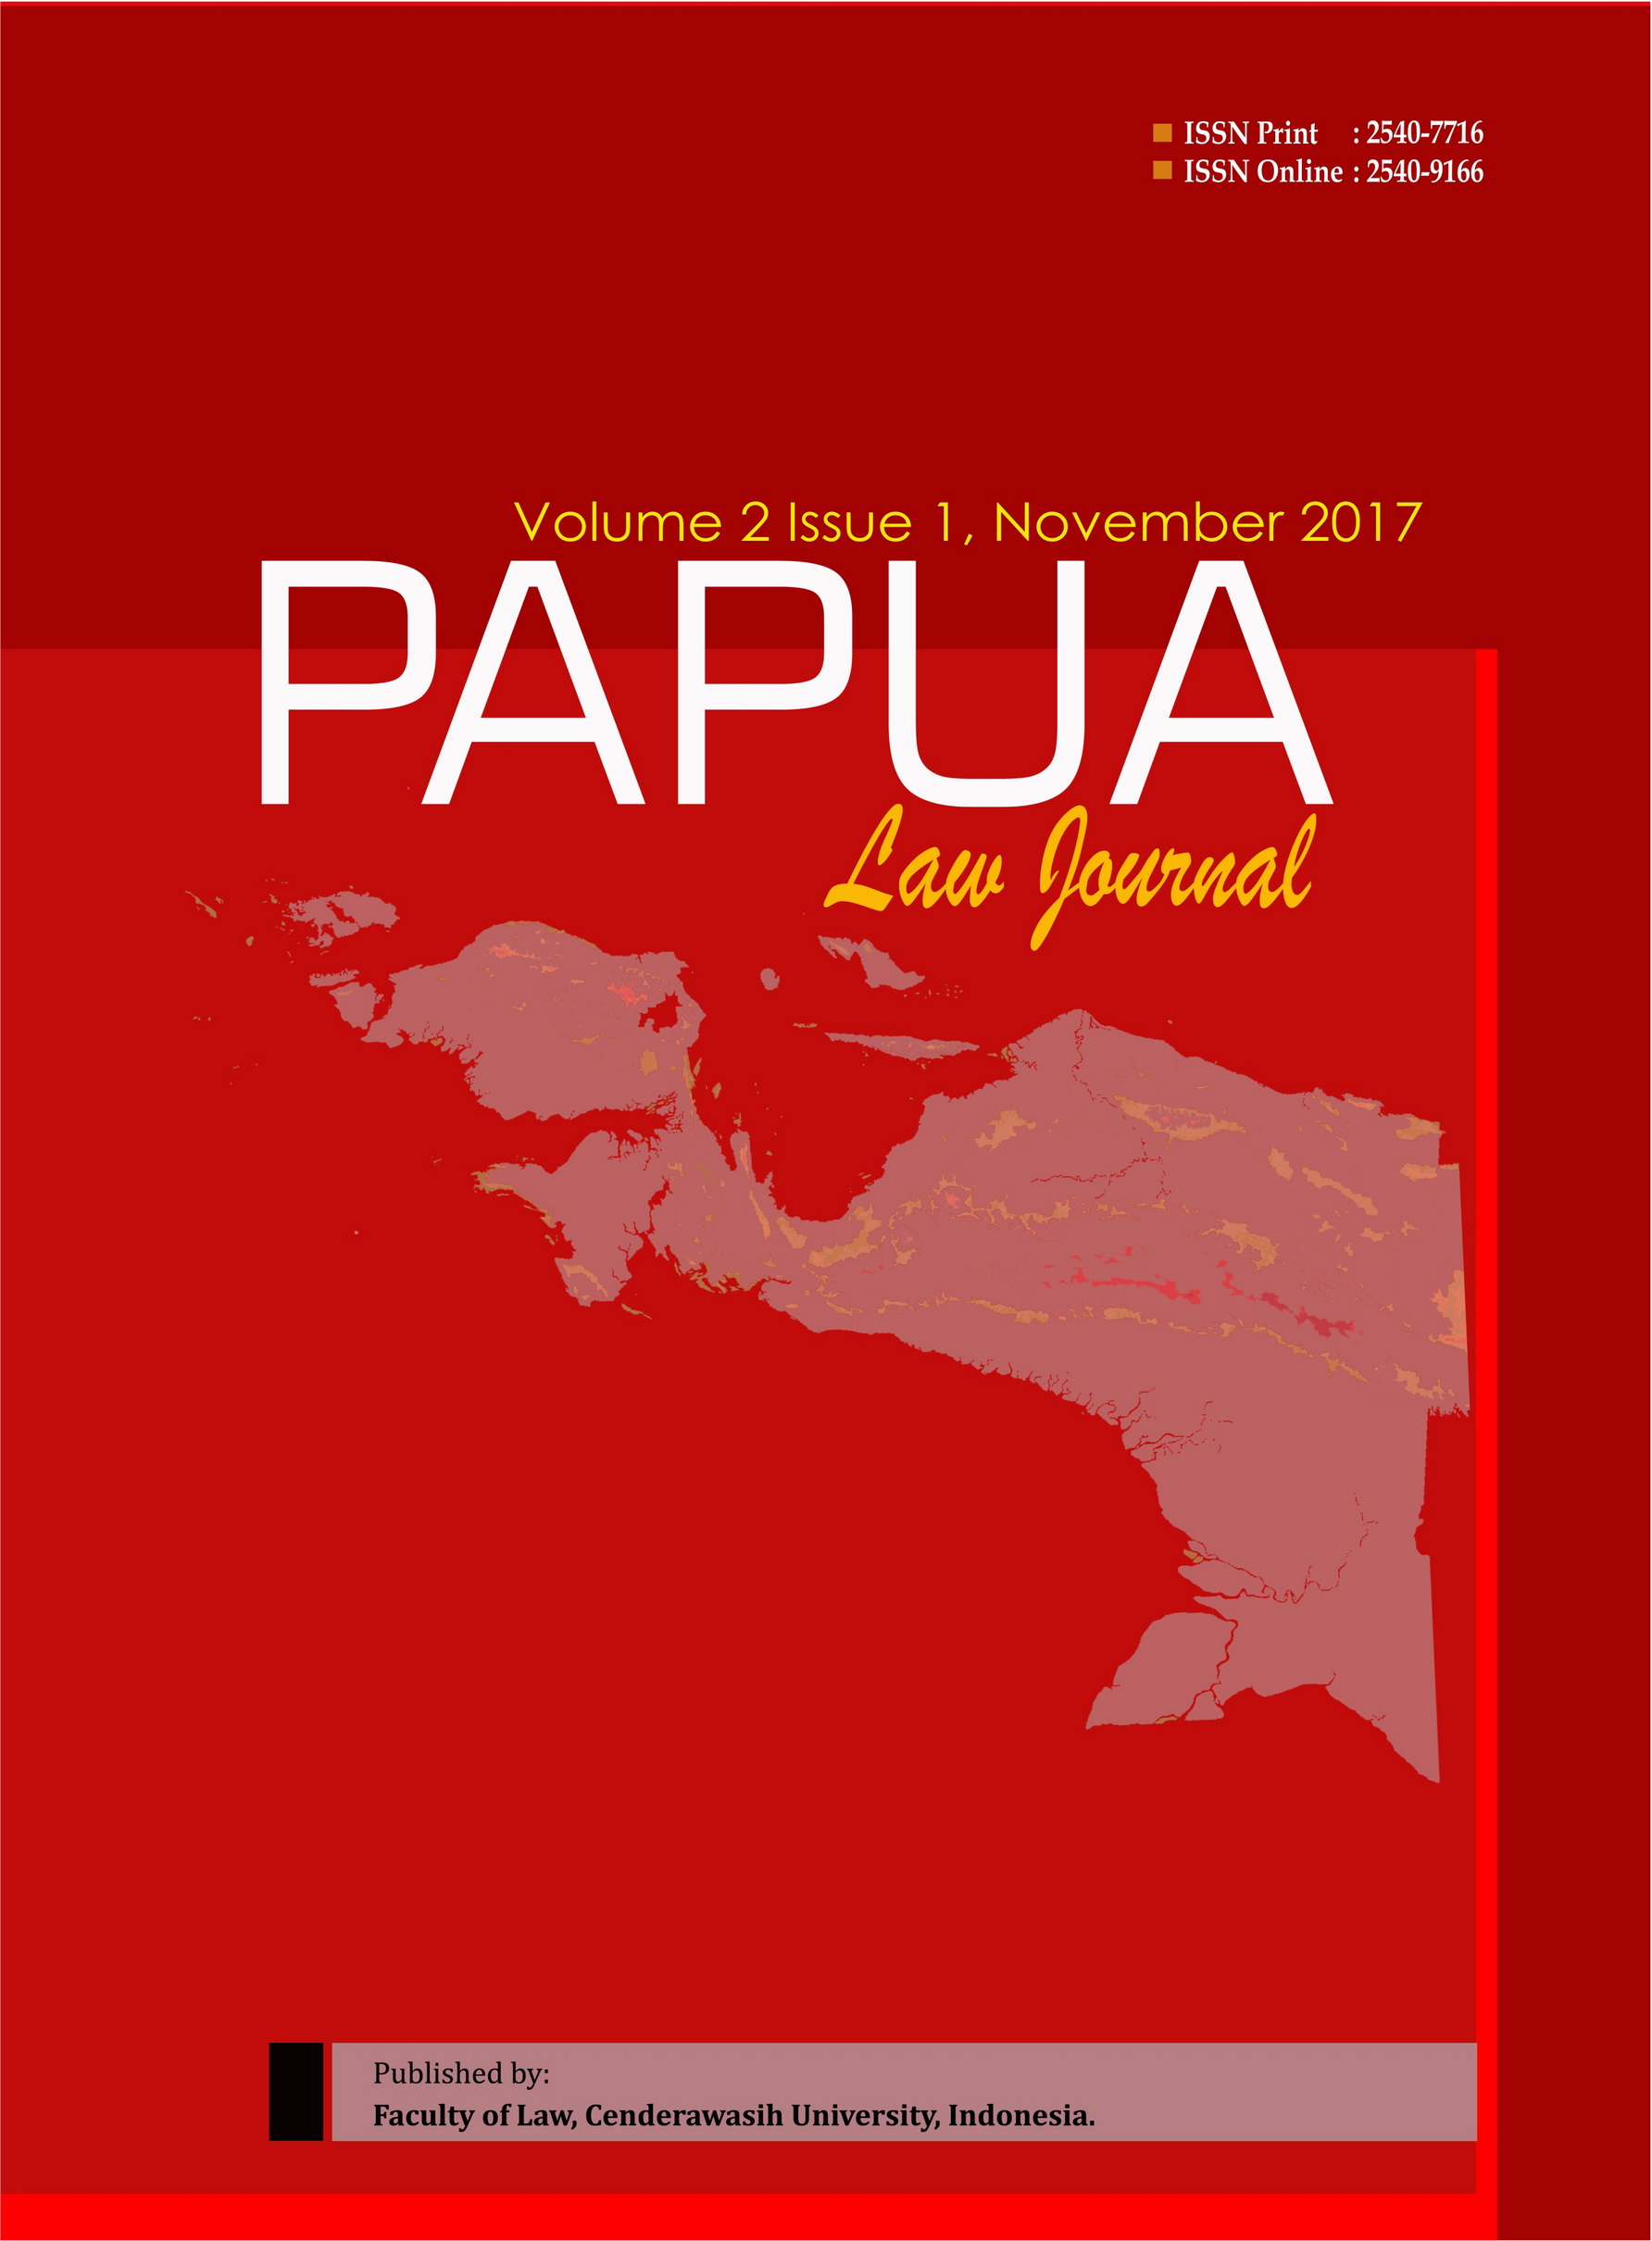 					View VOLUME 2 ISSUE 1, 2017
				